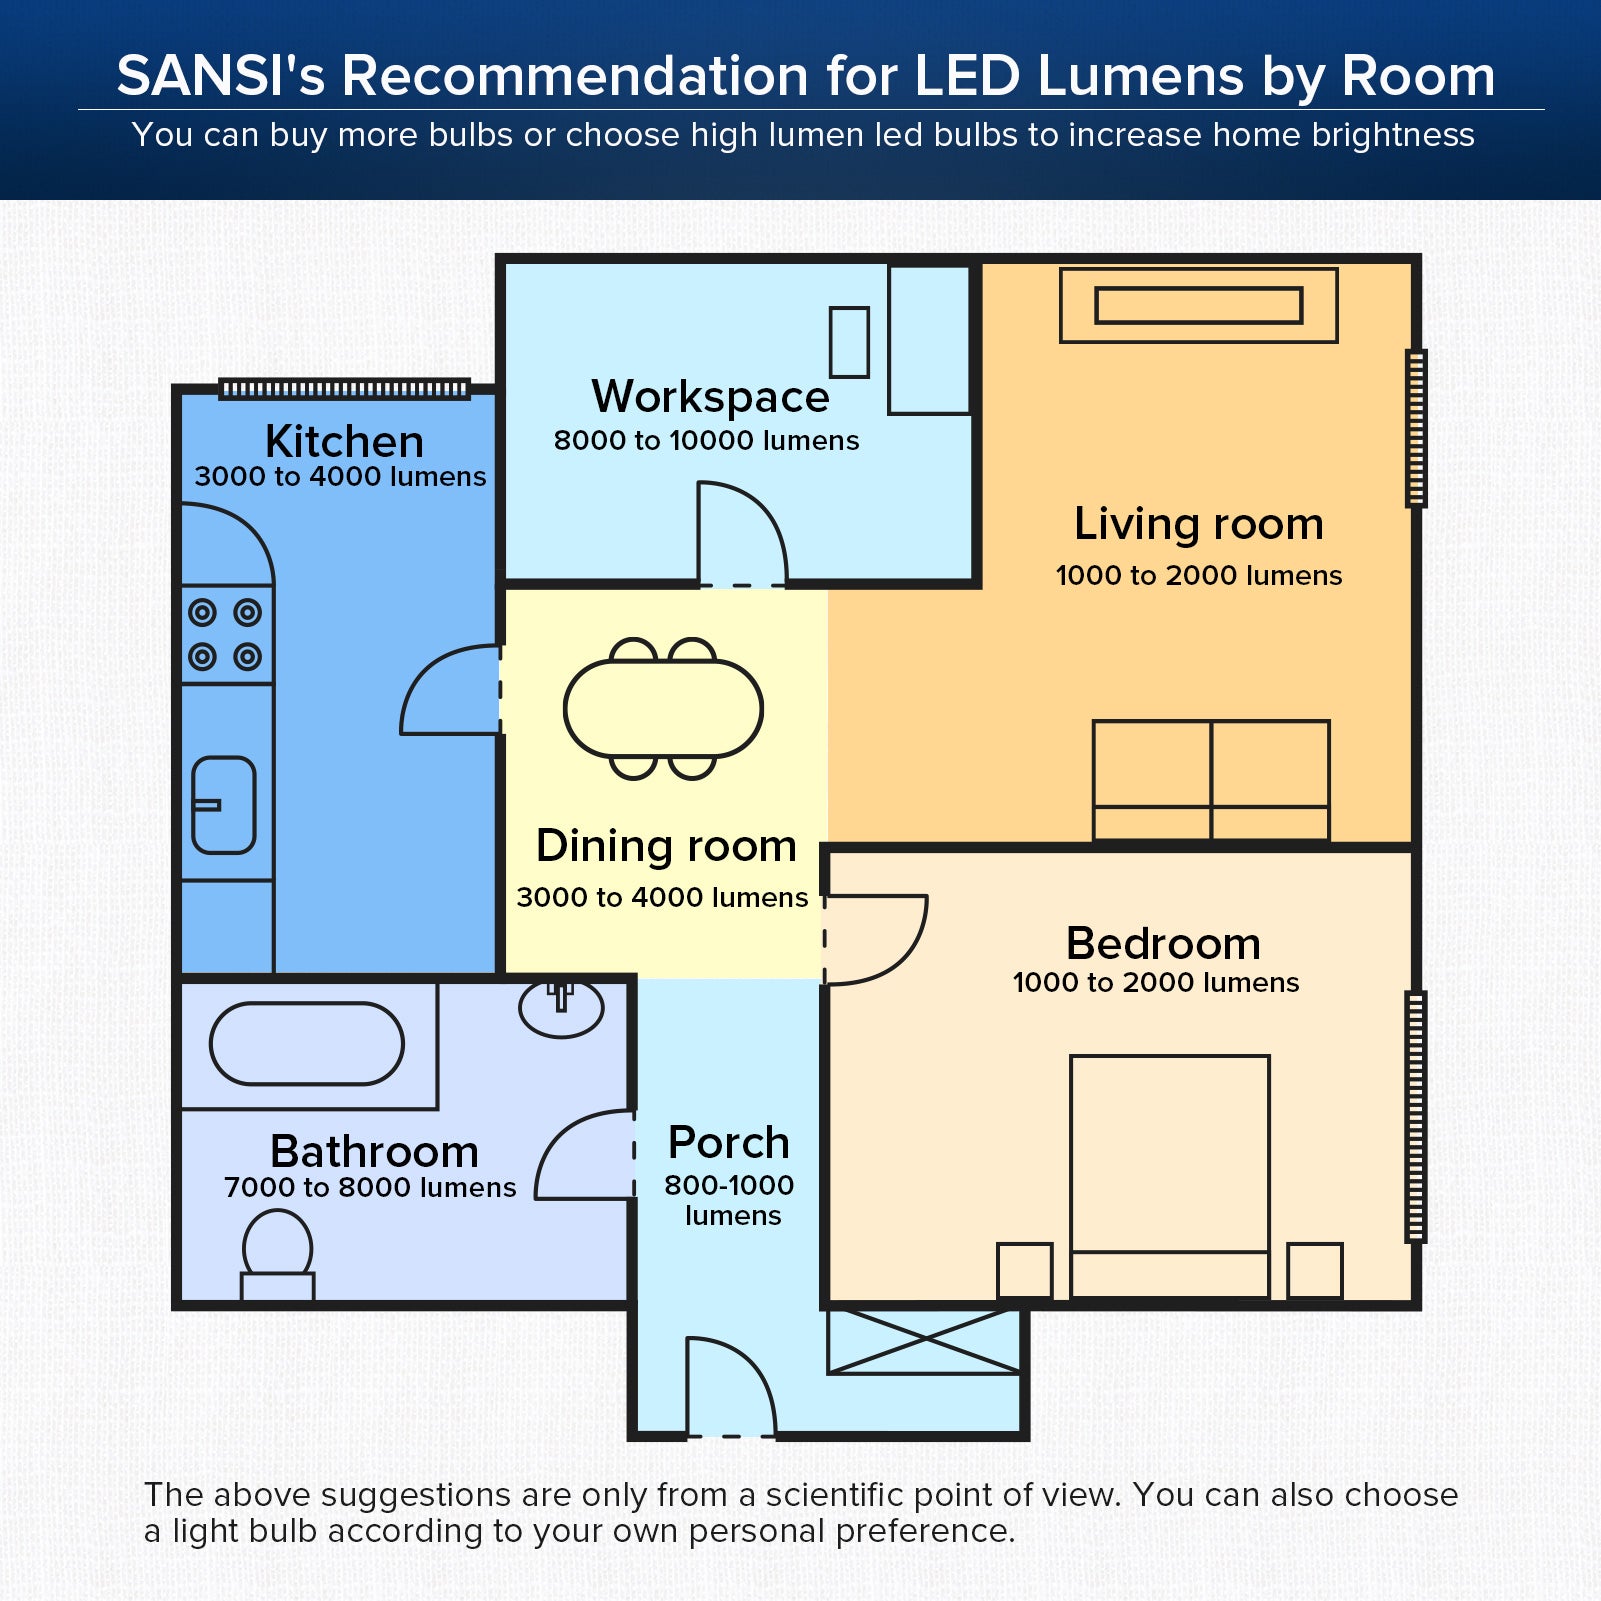 SANSI's recommendation for led lumens by room